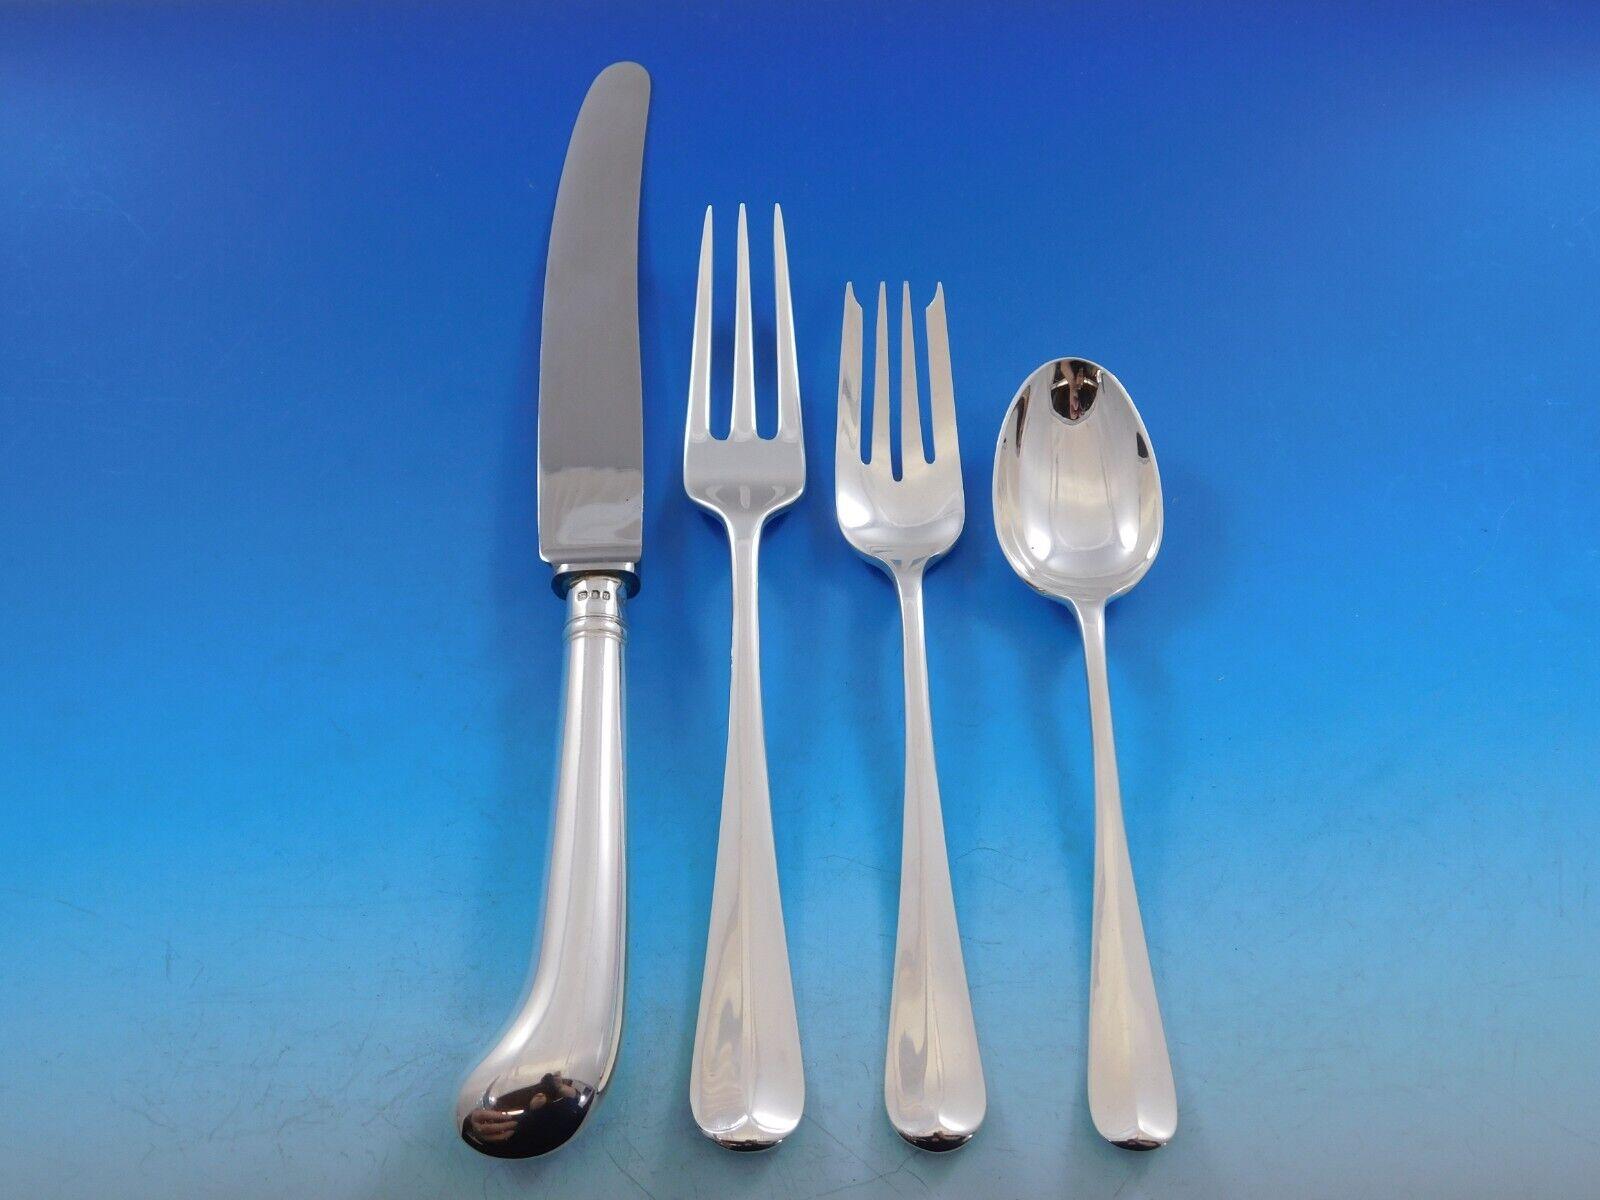 Monumental dinner and luncheon size Rattail by Tiffany & Co. sterling silver flatware set, 141 pieces. This set includes:

12 Dinner Size Knives, pistol grip, 9 7/8